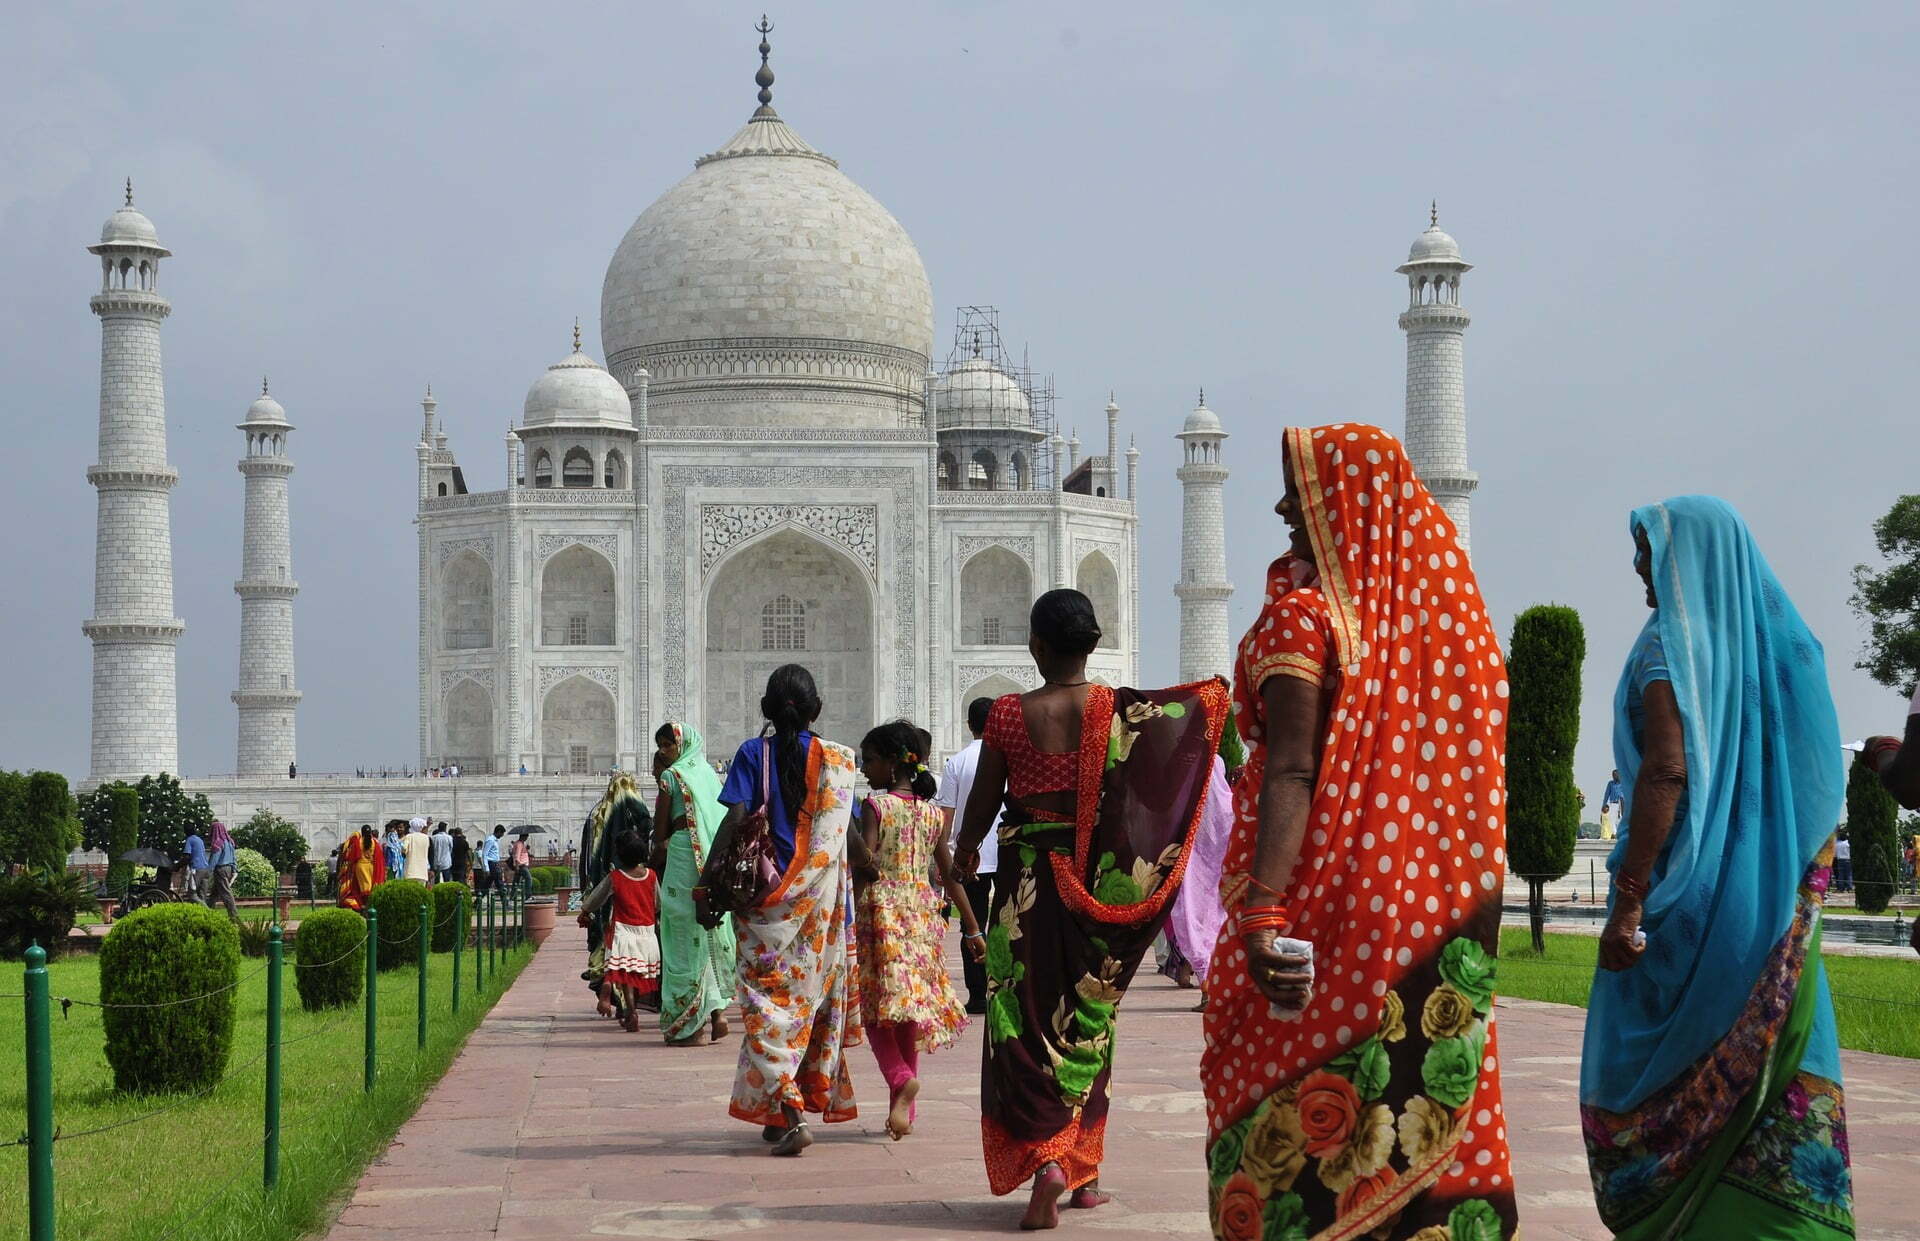 taj mahal gee8efae33 1920 CoP26: How India is Paving the Way Towards Climate Action